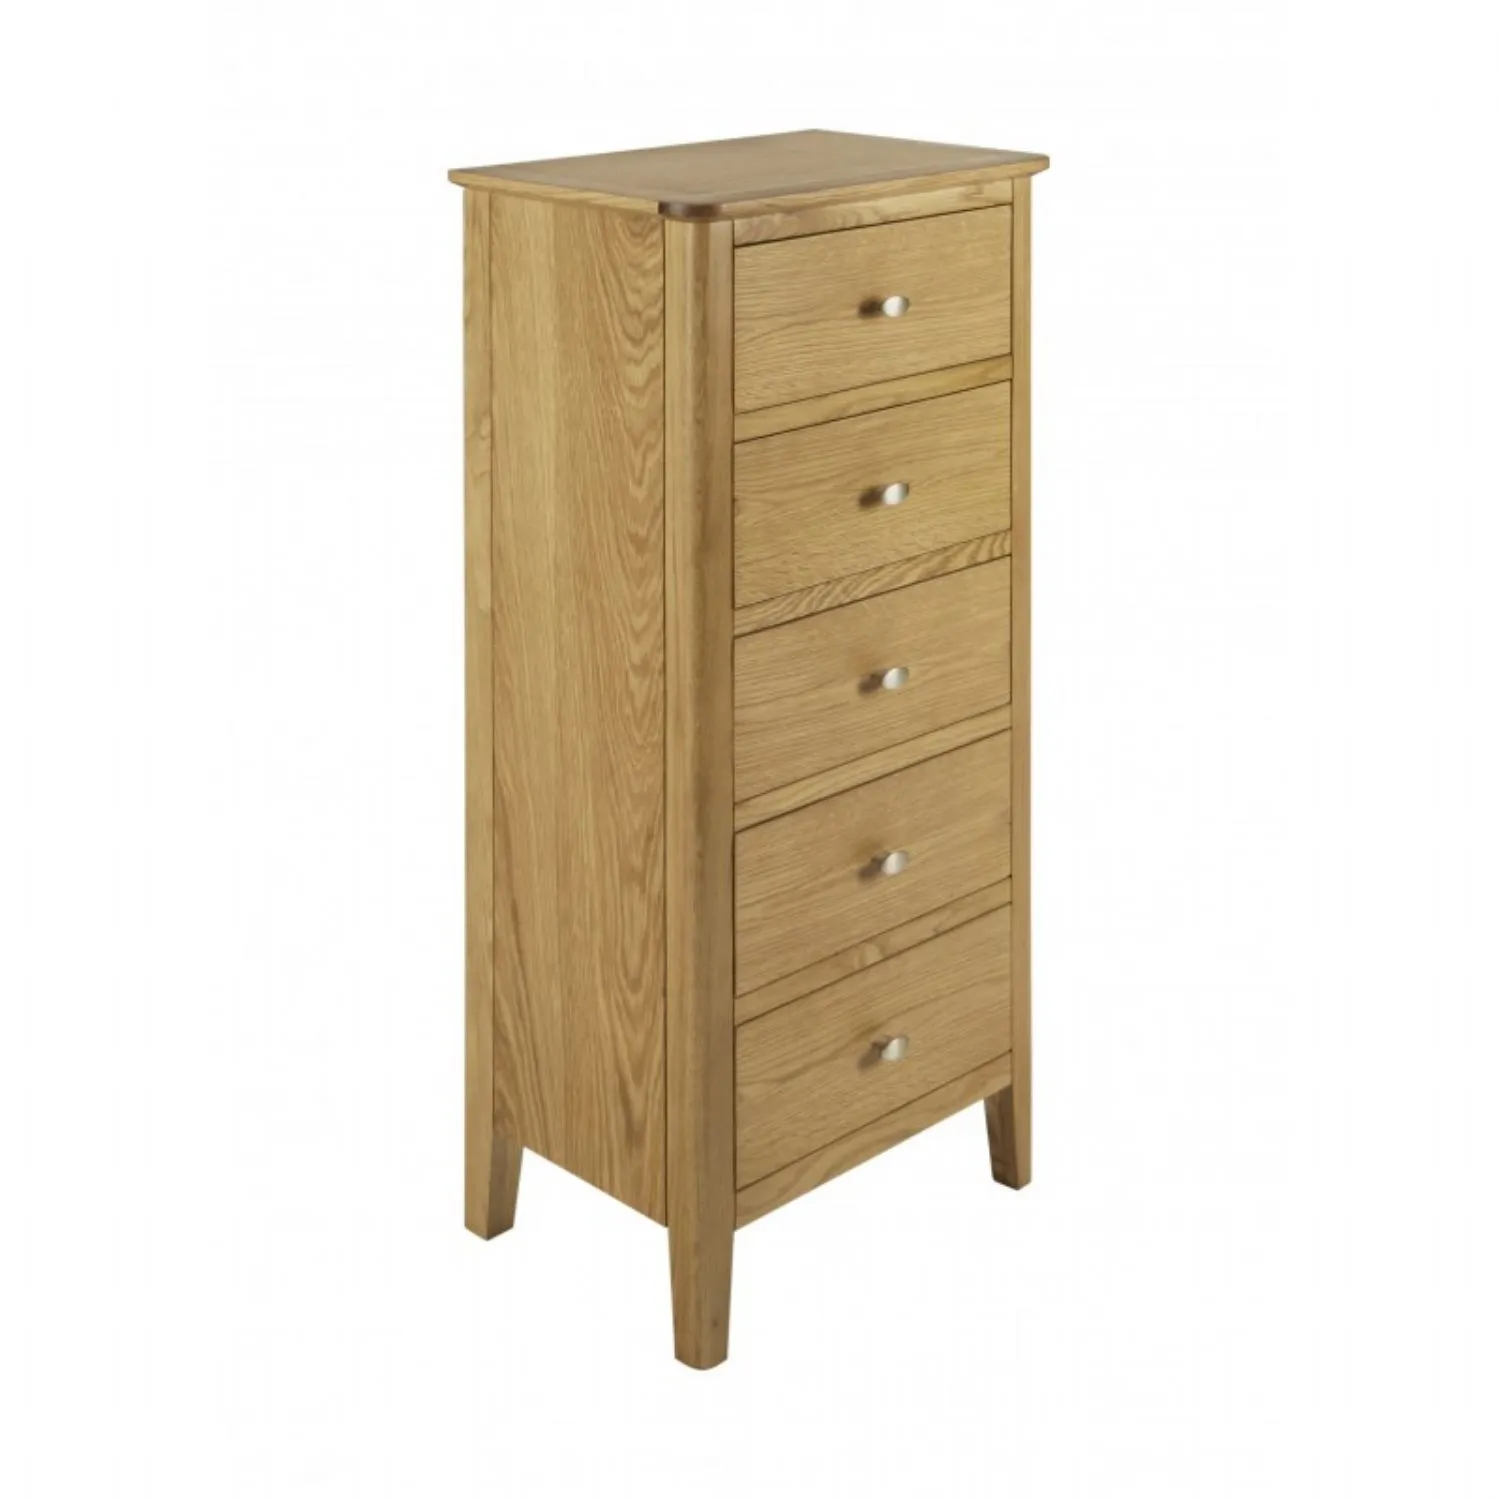 Solid Oak 5 Drawer Narrow Chest